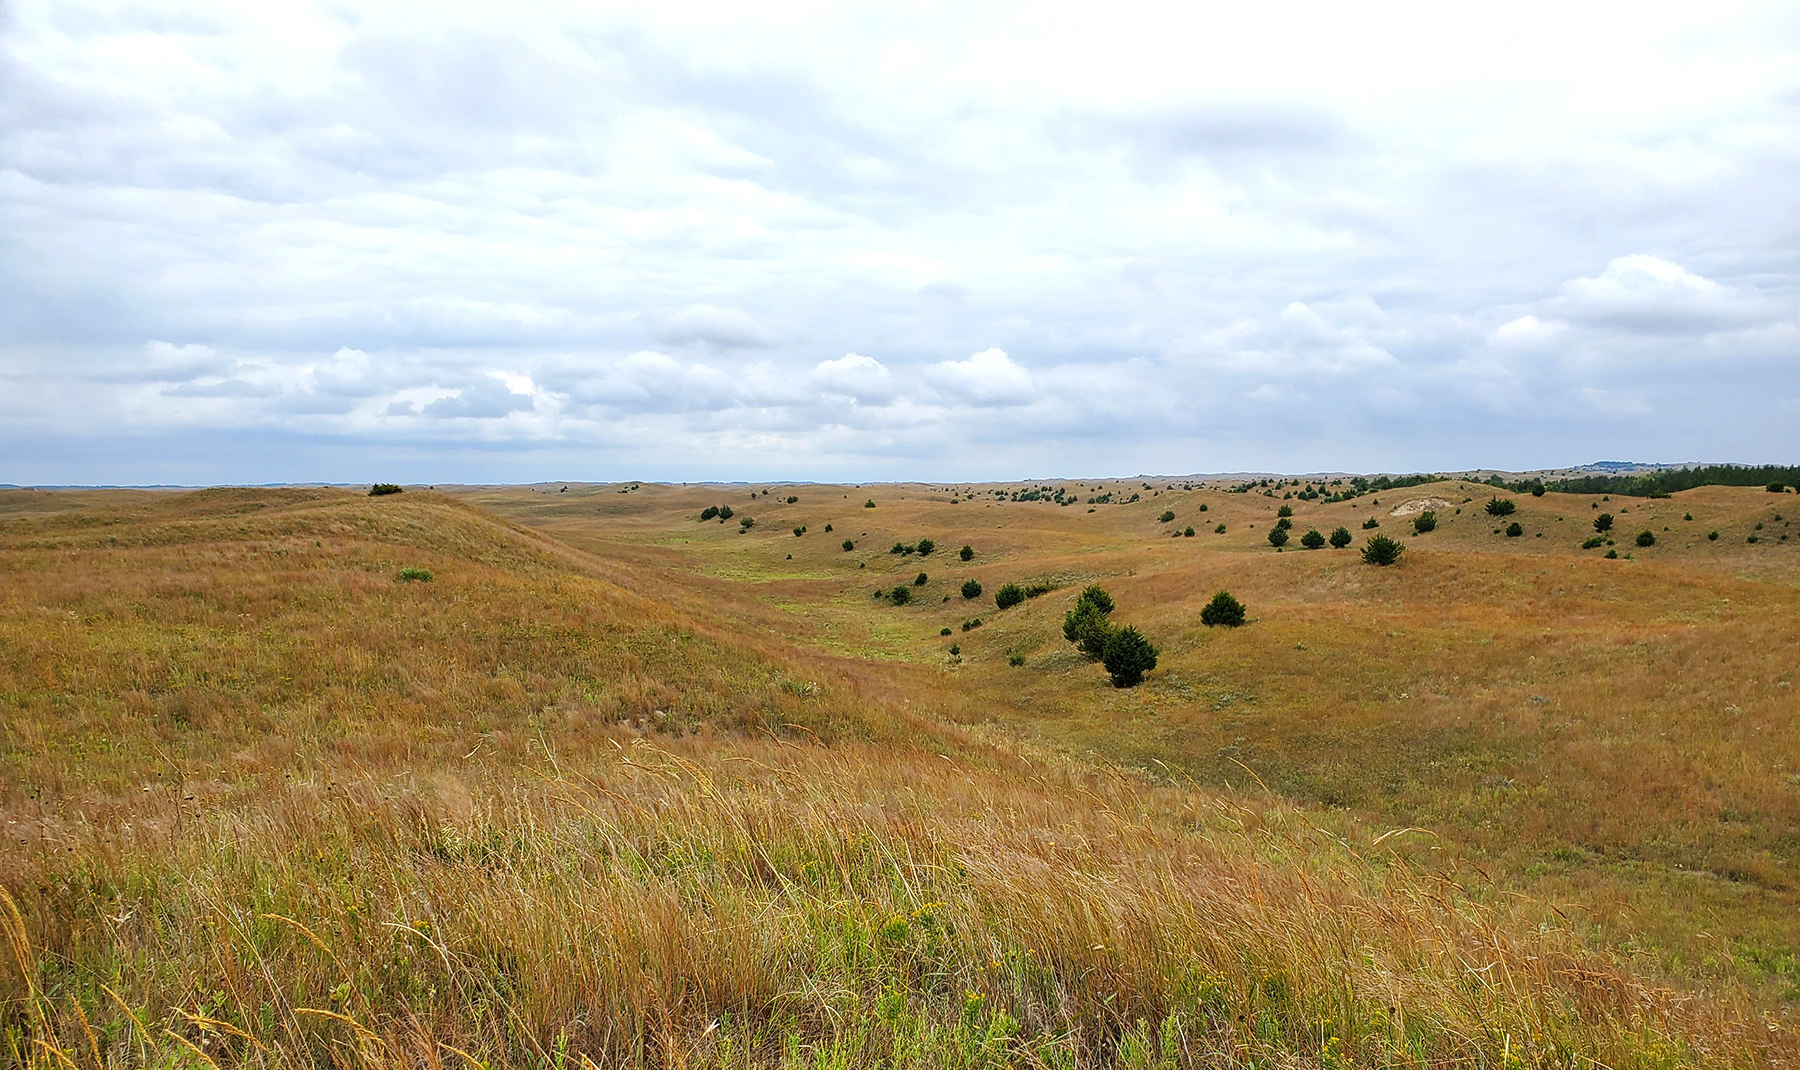 Eastern Red Cedar invasion in the Great Plains